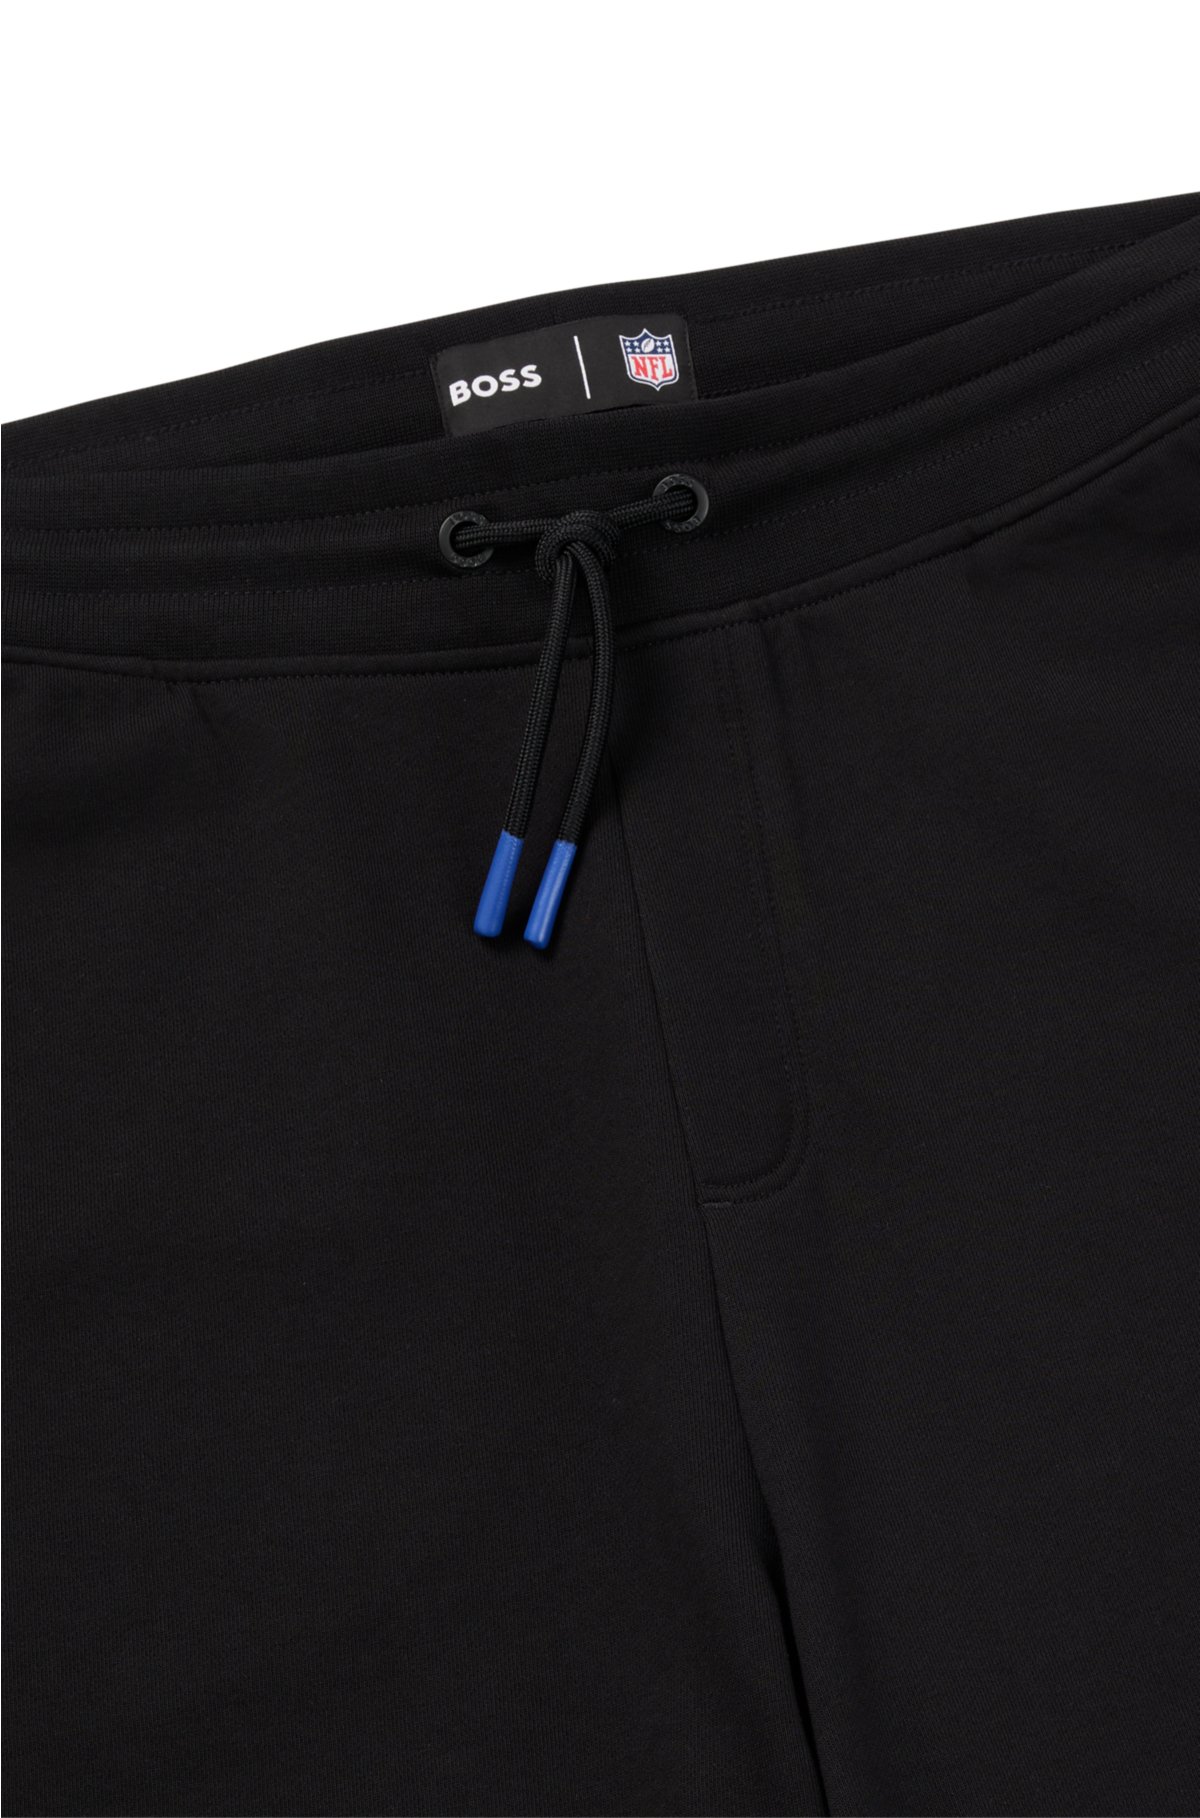 BOSS x NFL cotton-terry shorts with collaborative branding, Rams